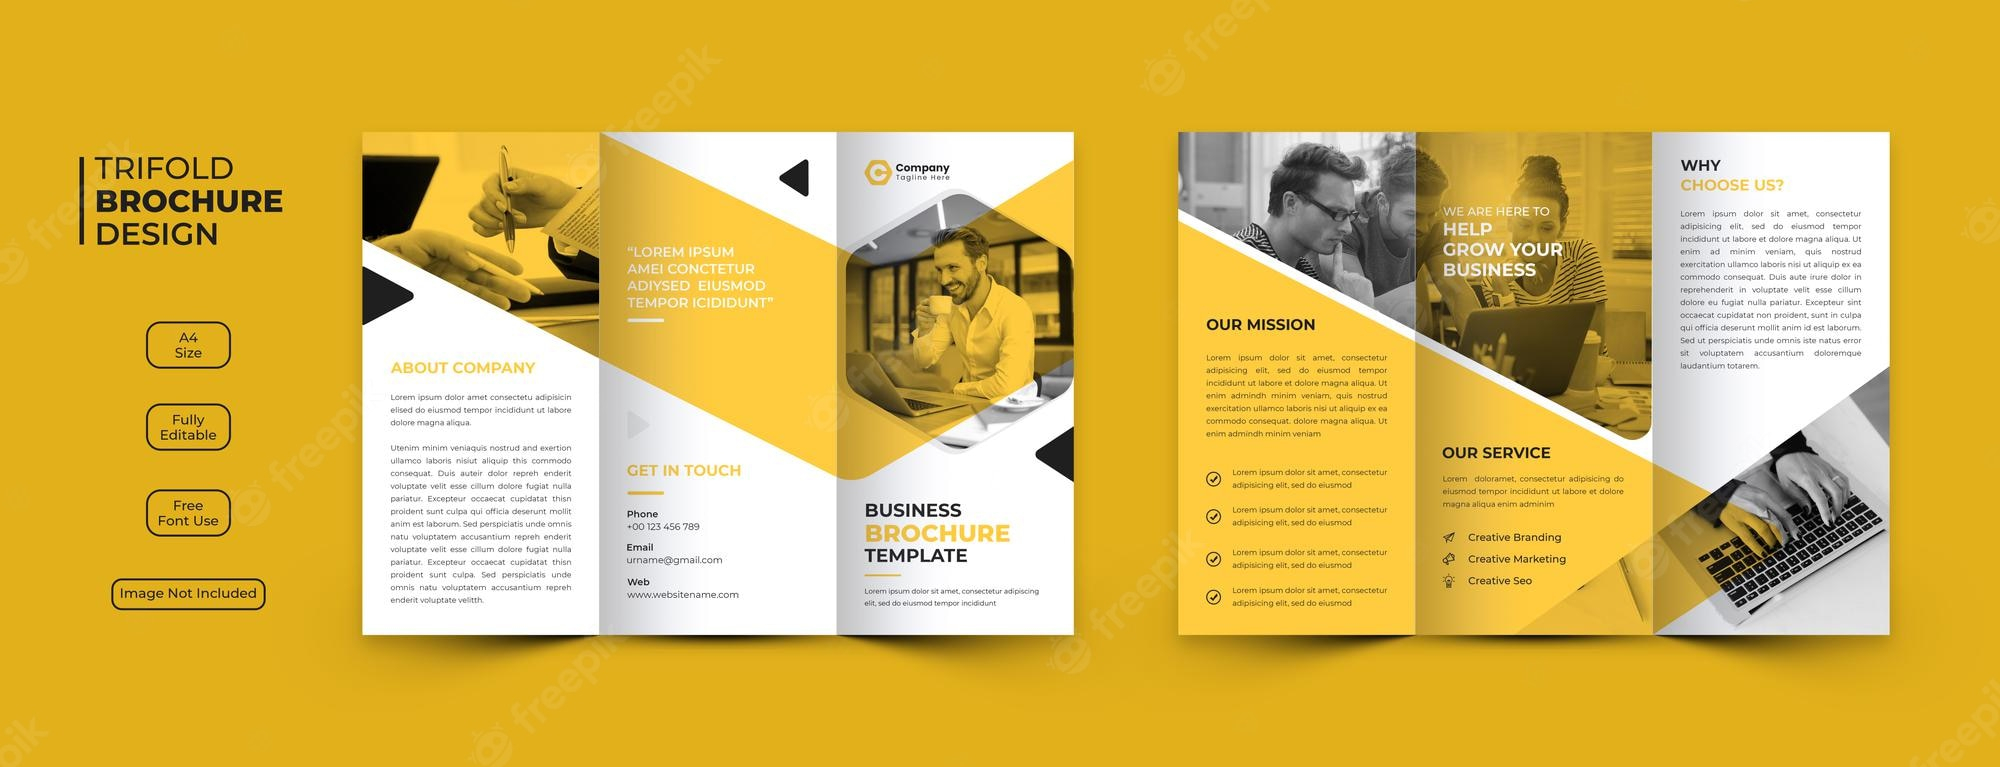 Brochure Images - Free Download on Freepik Intended For Free Brochure Template Downloads